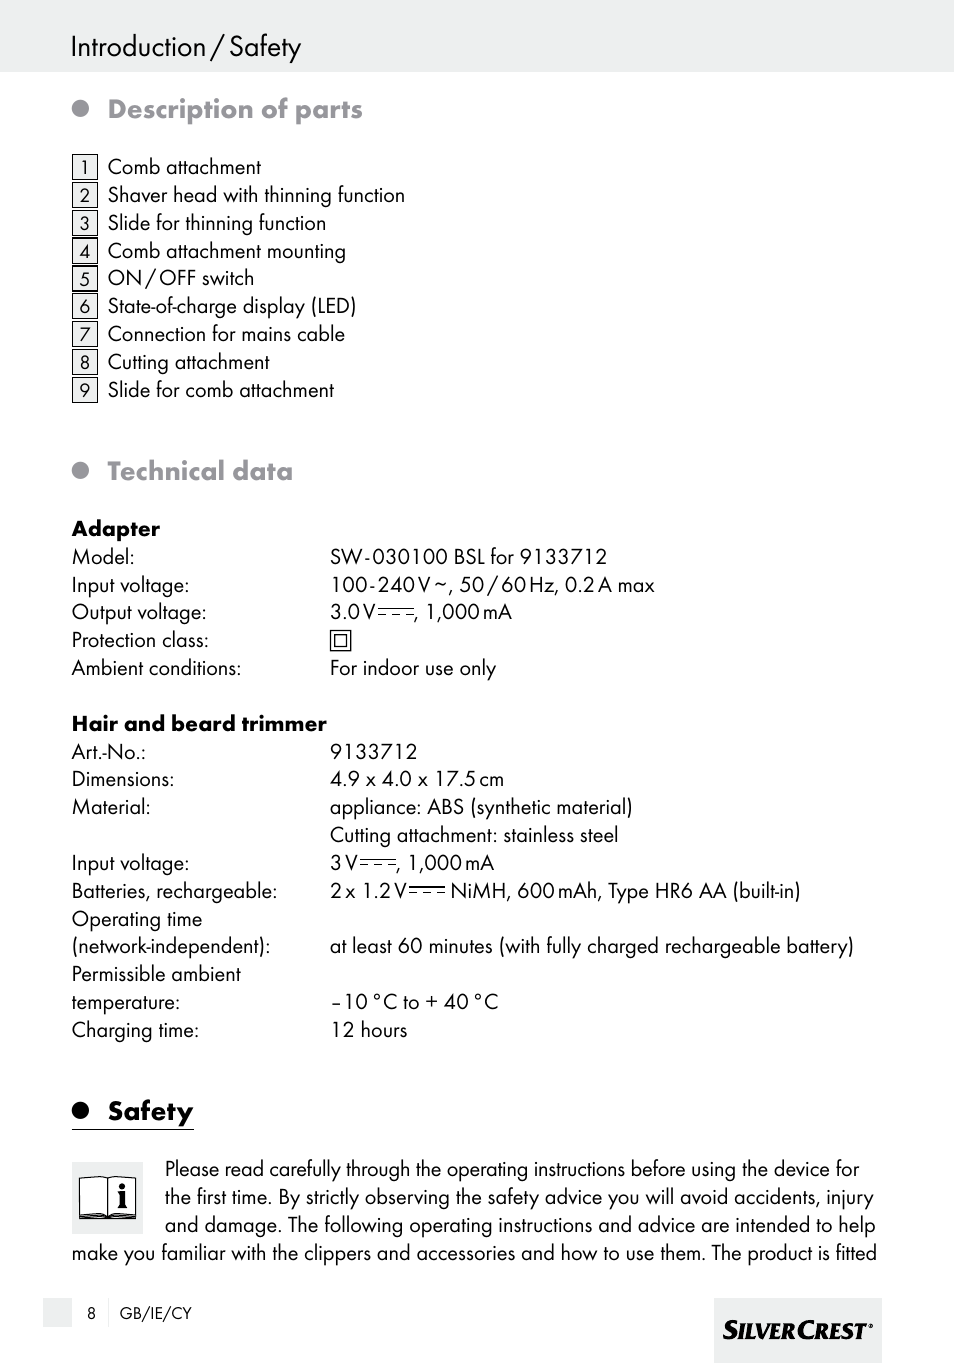 Introduction / safety, Description of parts, Technical data | Silvercrest  SHBS 600 A1 User Manual | Page 8 / 33 | Original mode